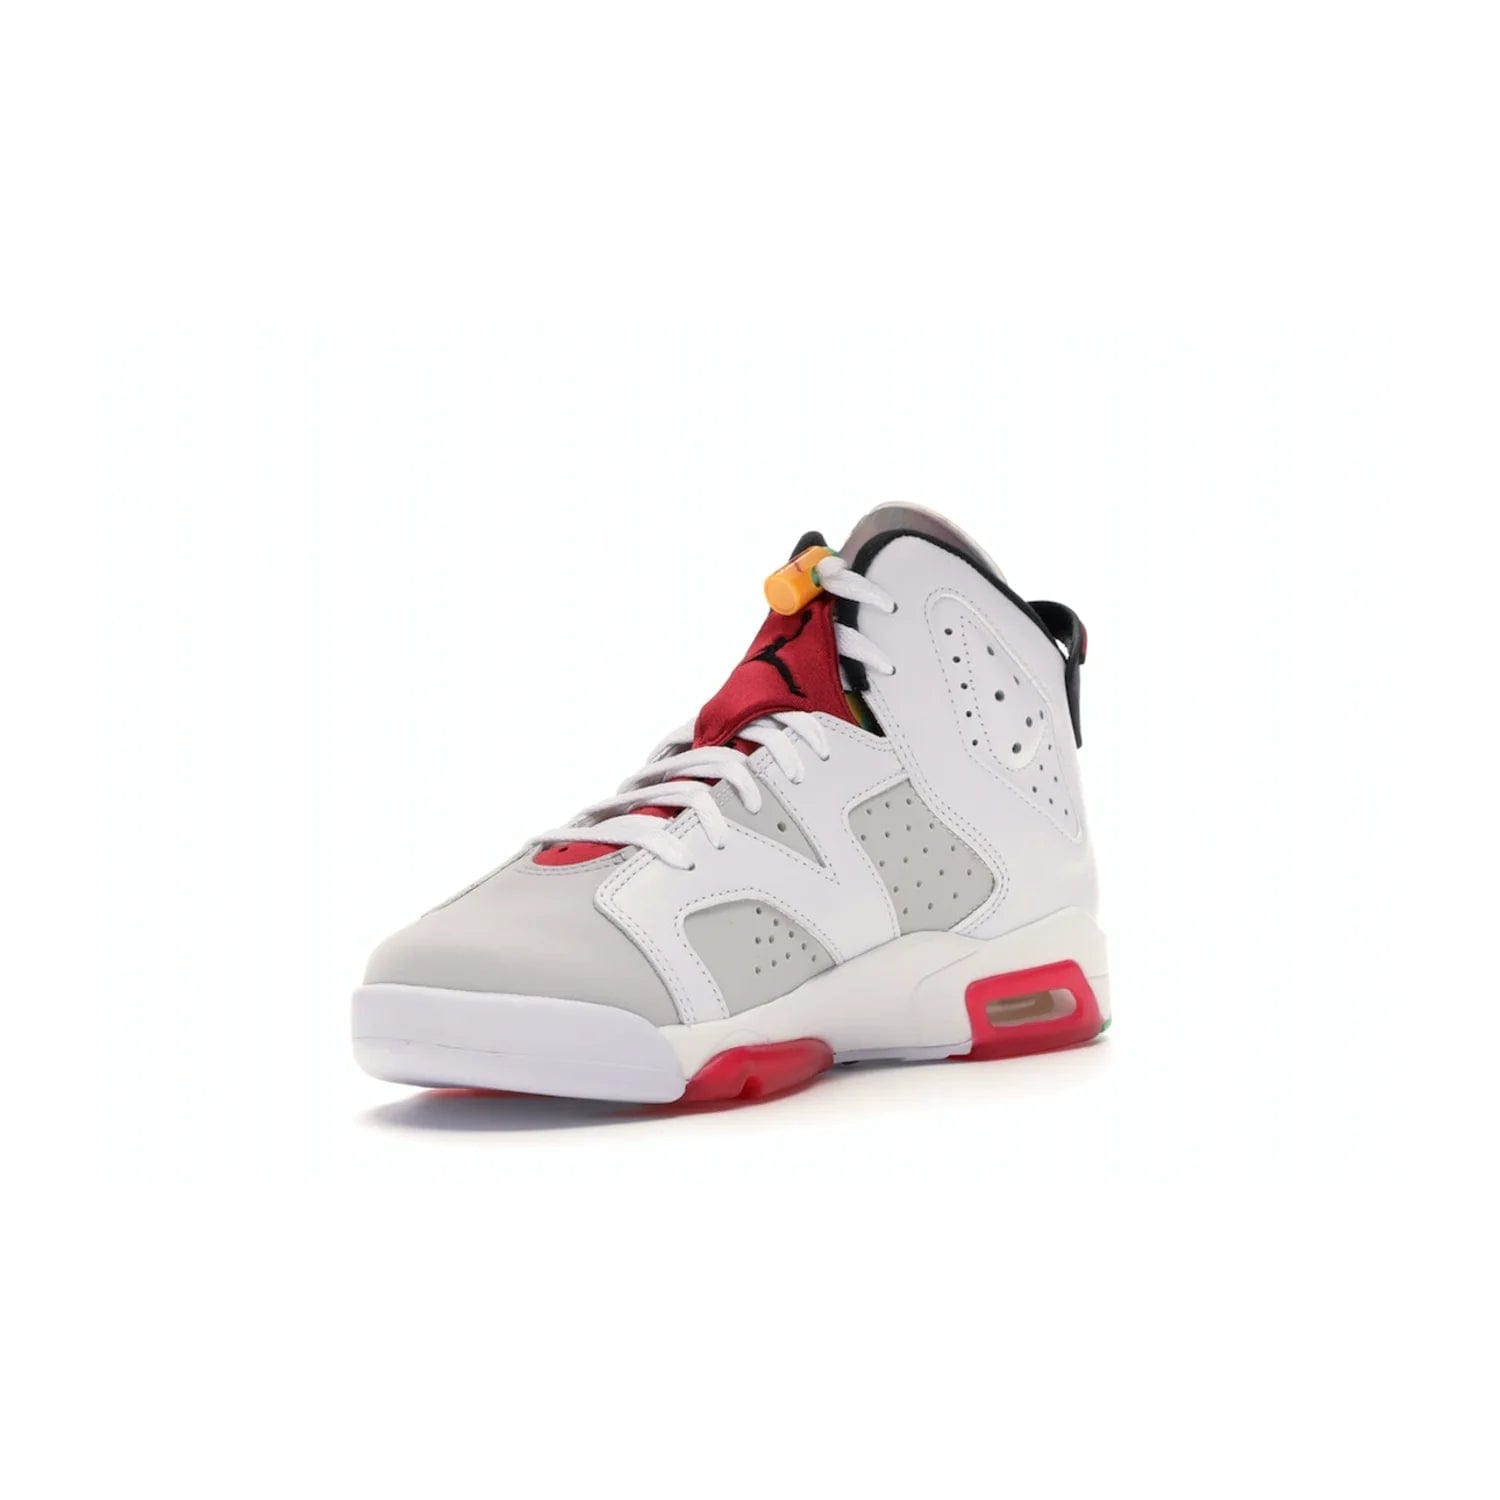 Jordan 6 Retro Hare (GS) - Image 14 - Only at www.BallersClubKickz.com - The Air Jordan 6 Hare GS. Comfortable suede upper, perforations, red pods, two-tone midsole, and signature "Jumpman" emblem. Released 17 June 2020. Perfect for any sneakerhead.